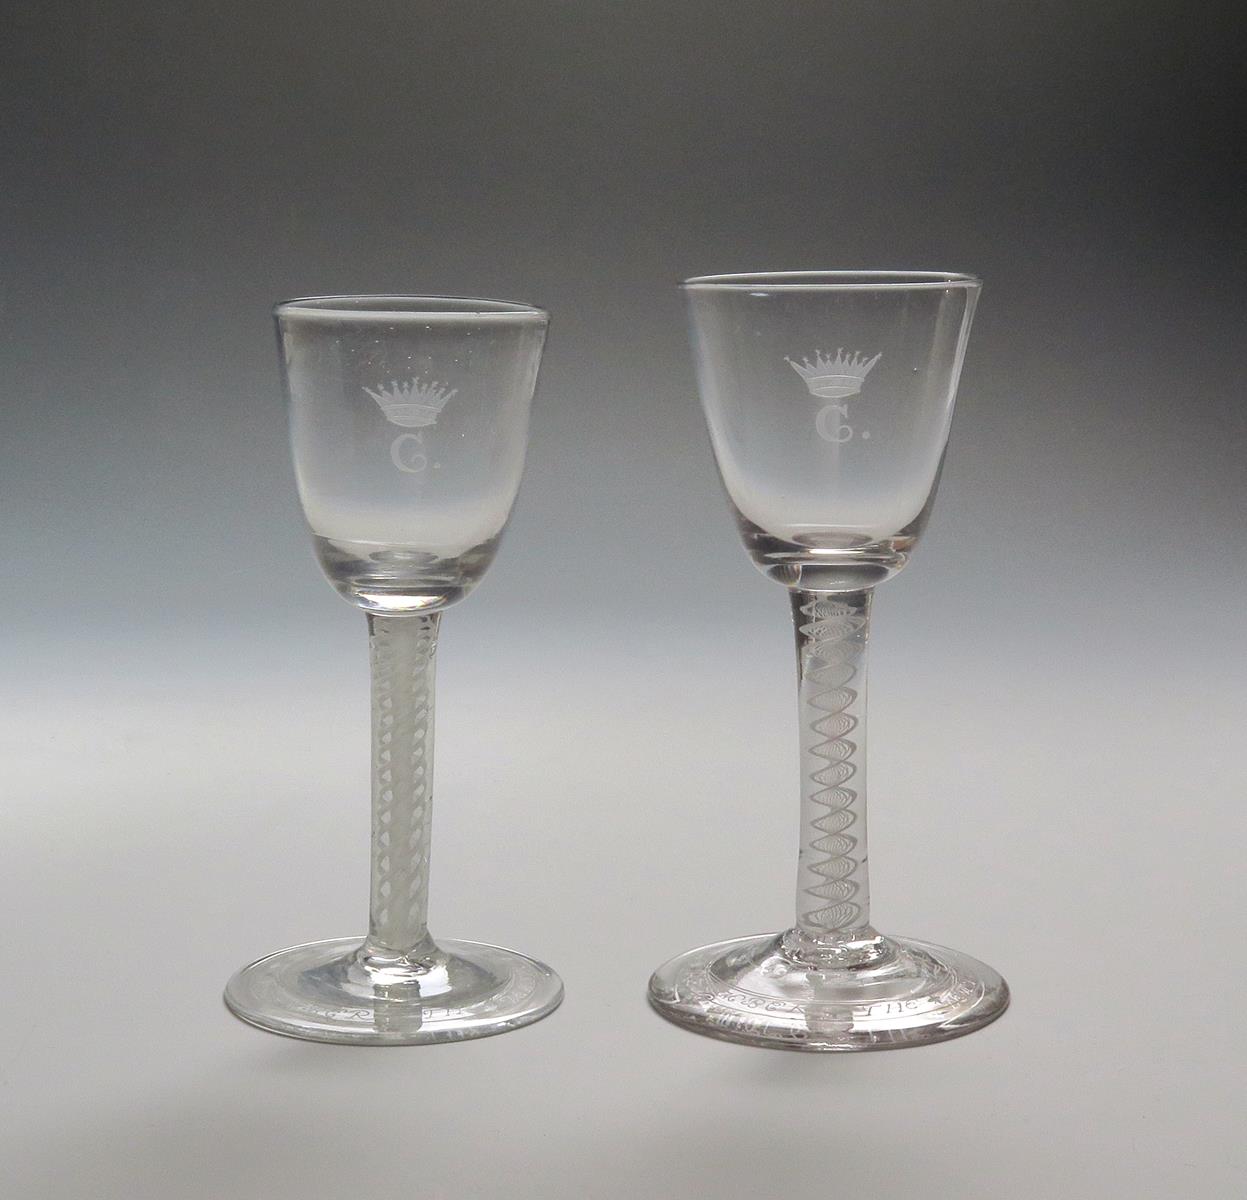 A pair of wine glasses c.1770, one English, one Dutch, the round funnel bowls later engraved with